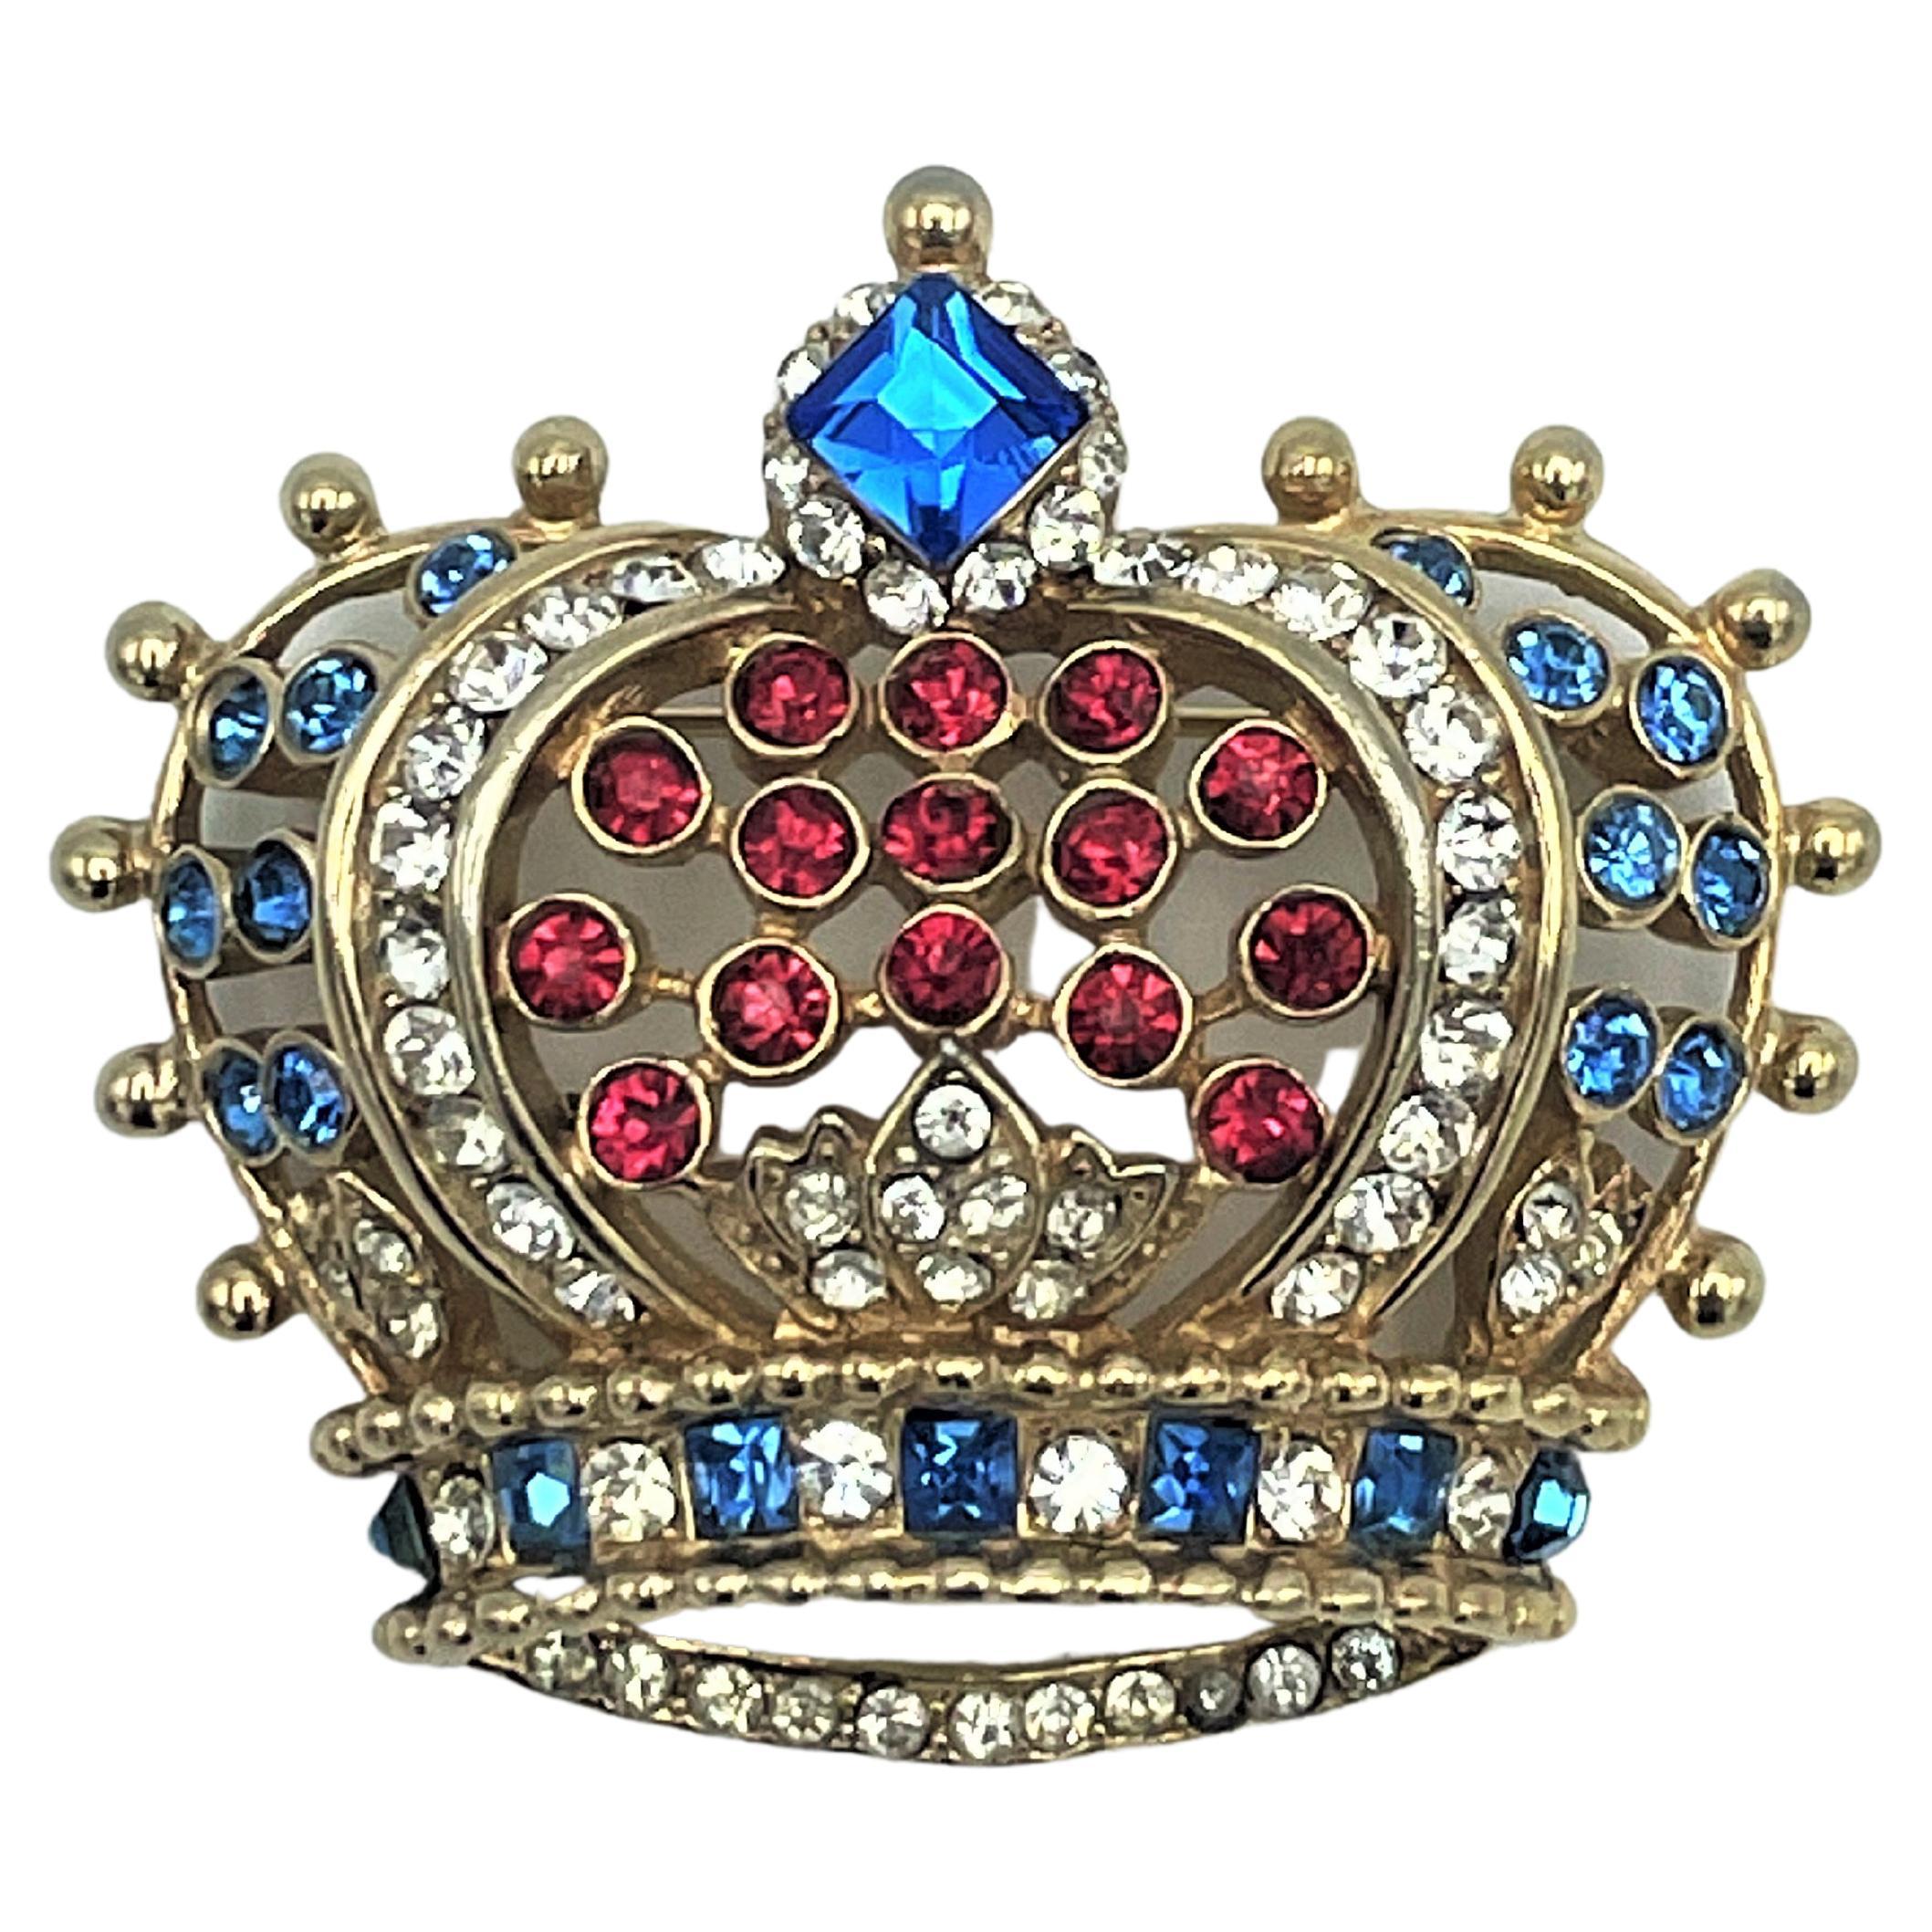 Golden jubilee royal crown brooch set with rhinestones, gold plated, 1950s